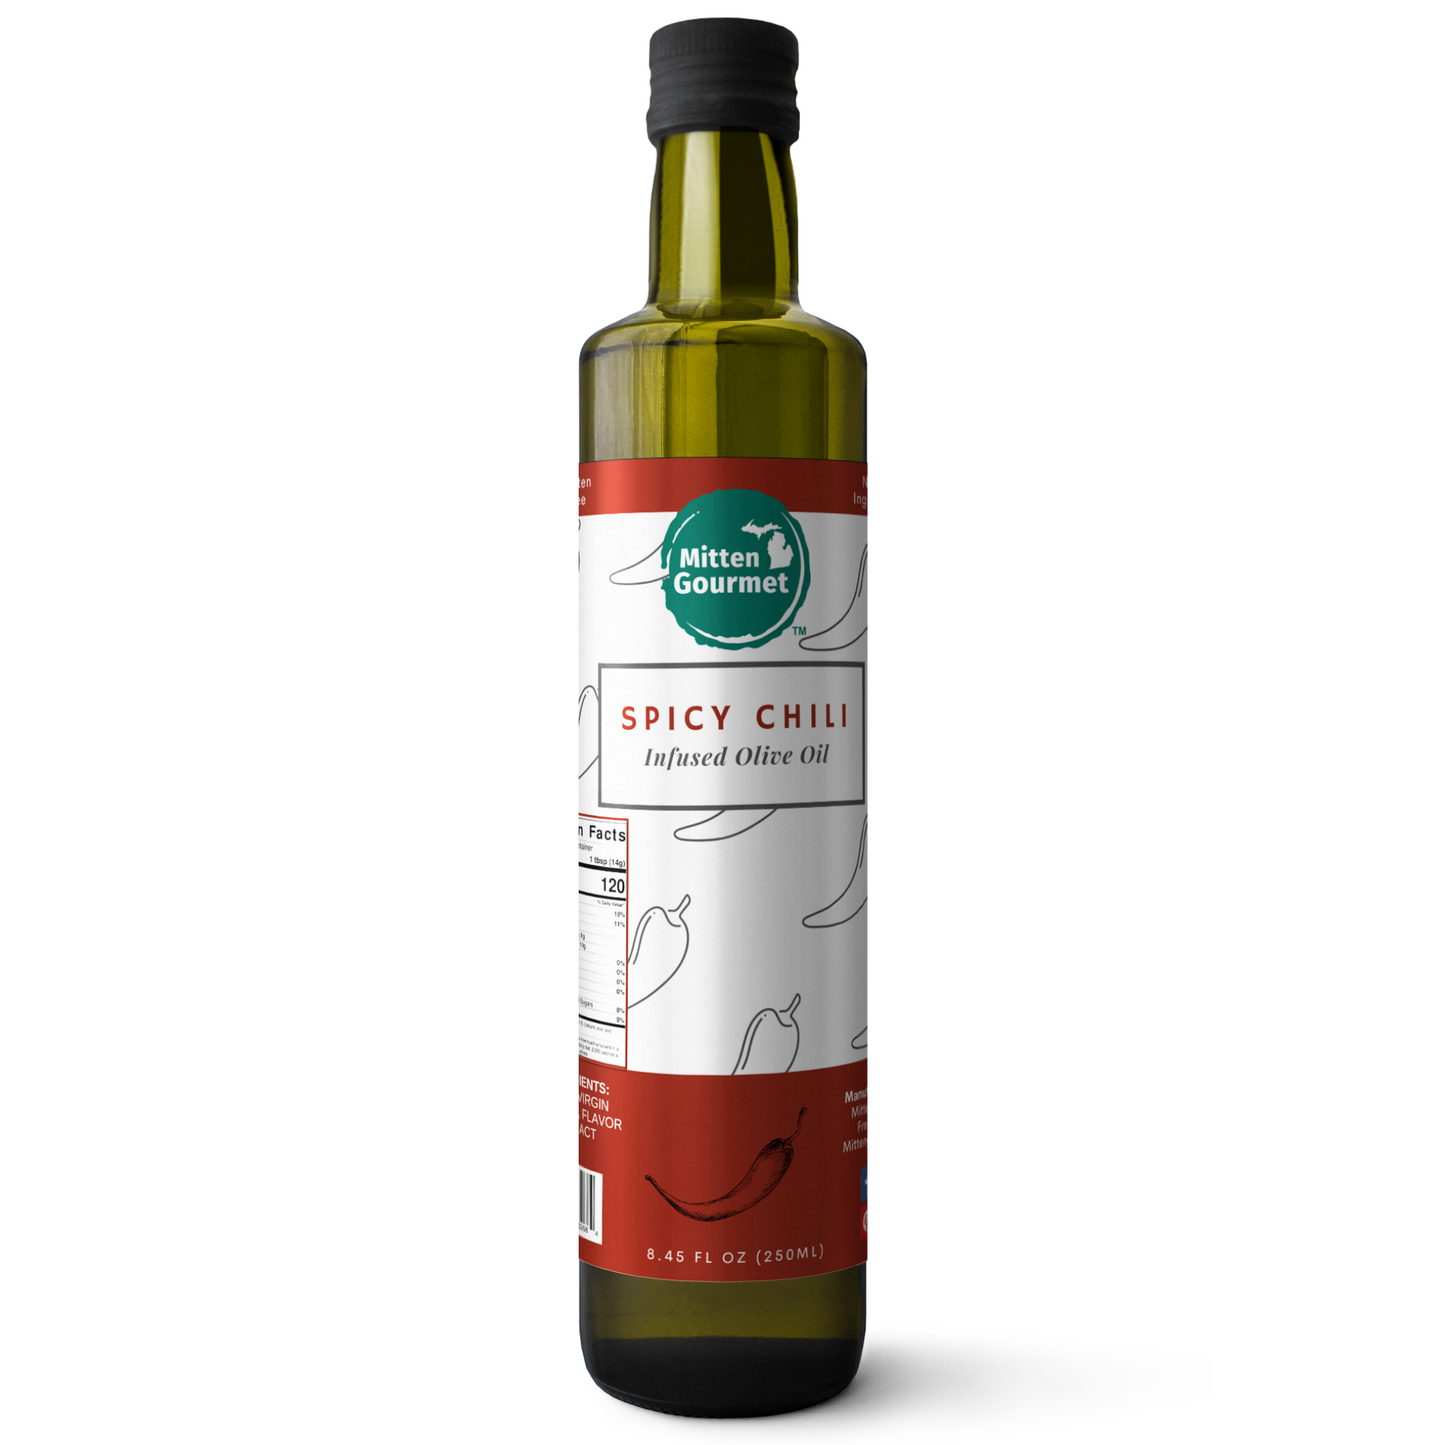 Spicy Chili Infused Olive Oil - Case of 6 ($11.99ea)